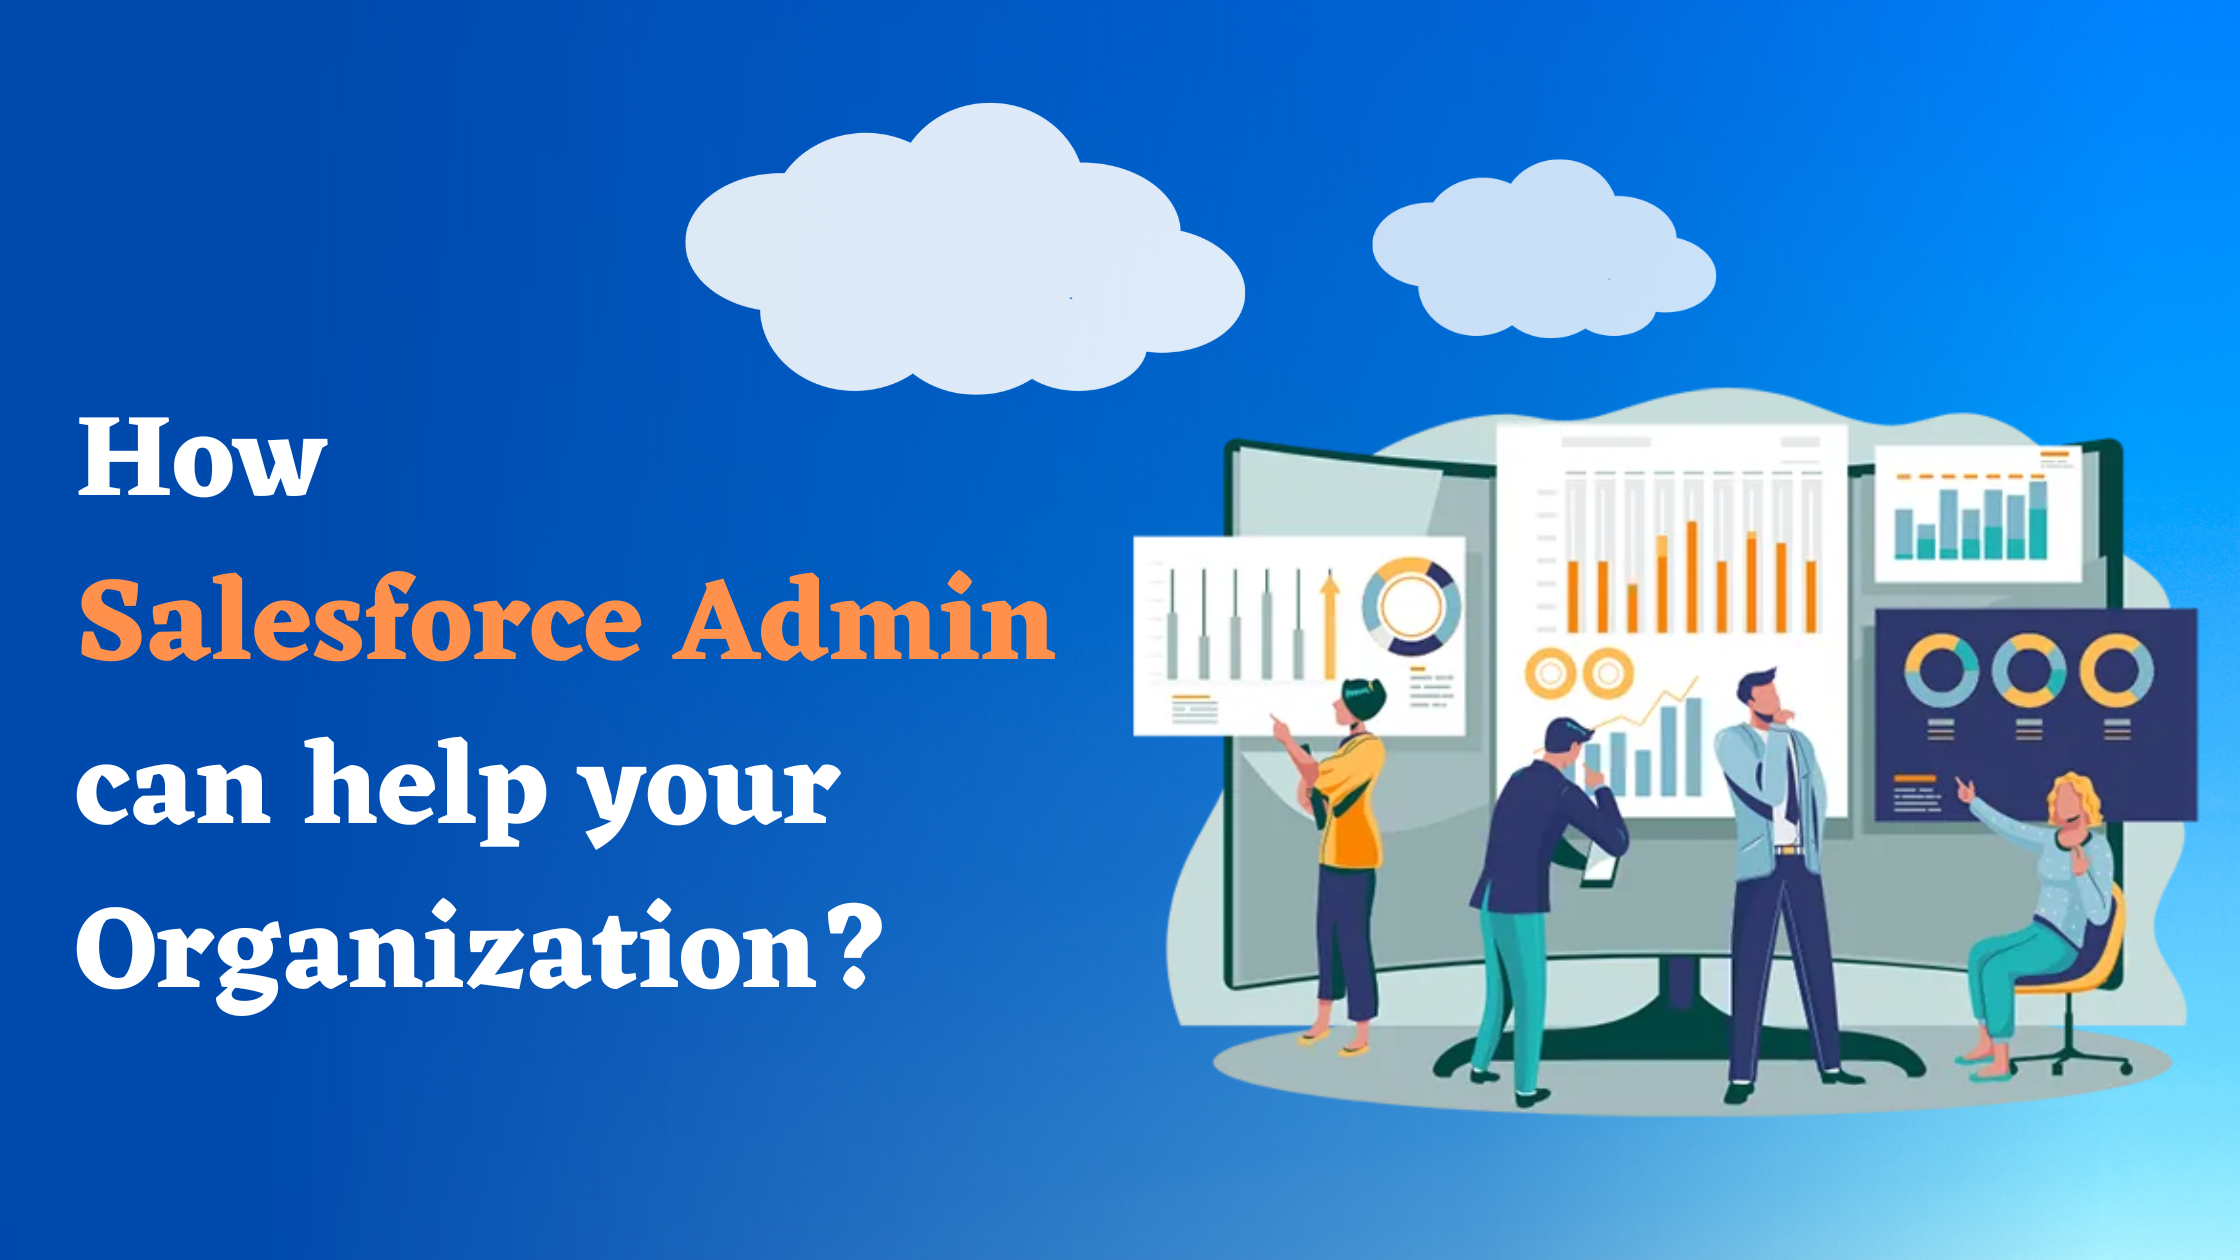 How Salesforce Admin can help your Organization?